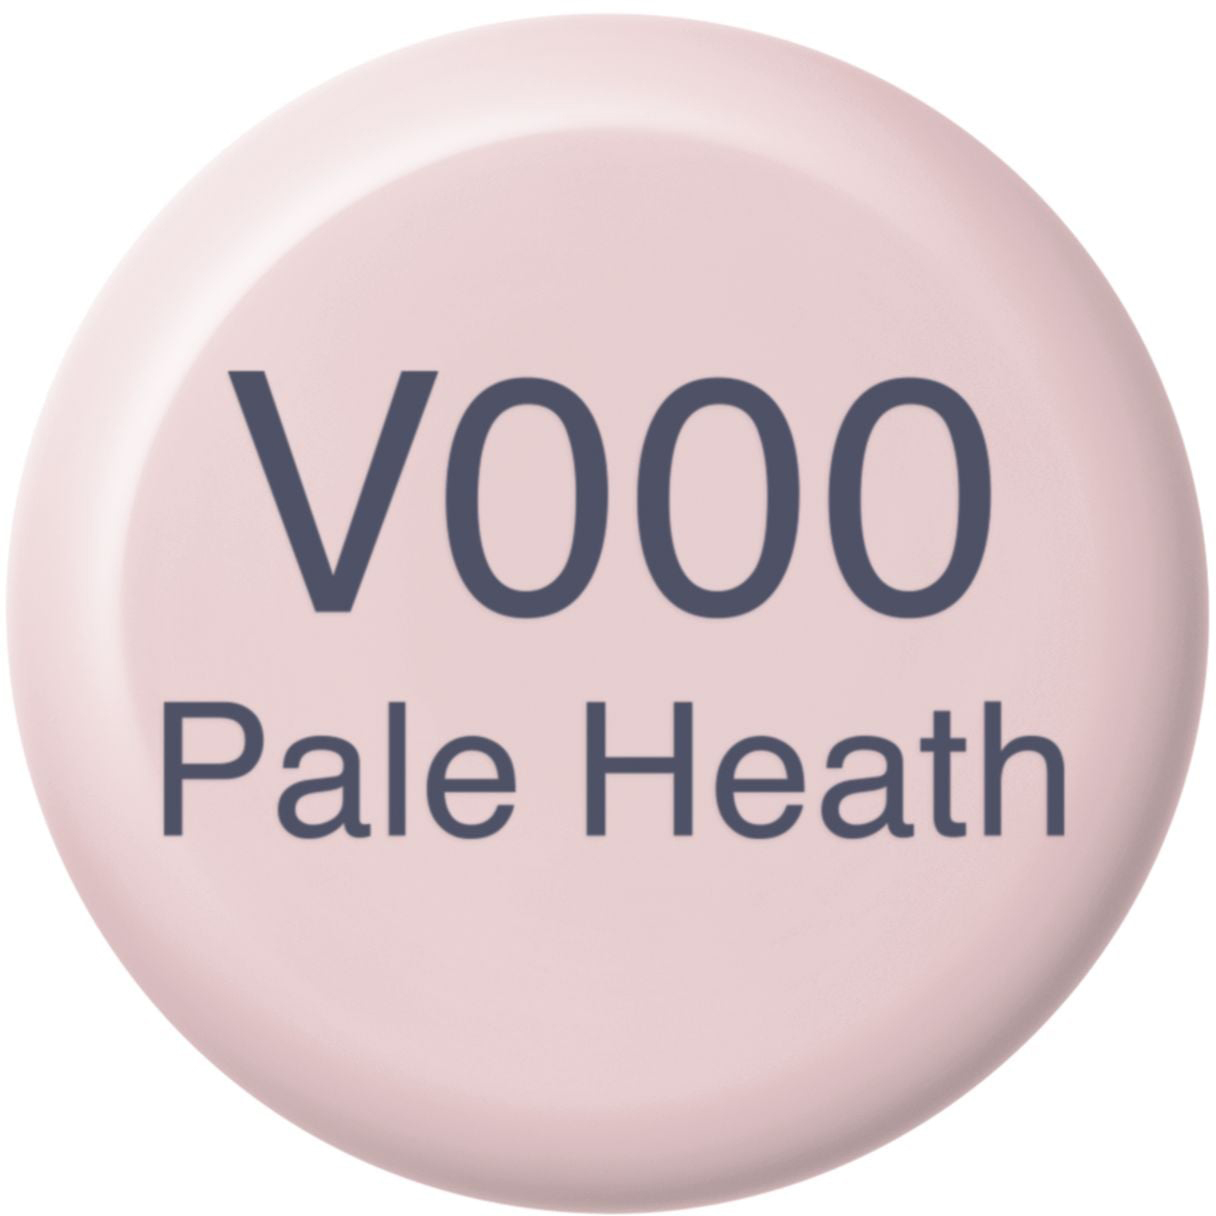 COPIC Ink Refill 21076265 V000 - Pale Heath